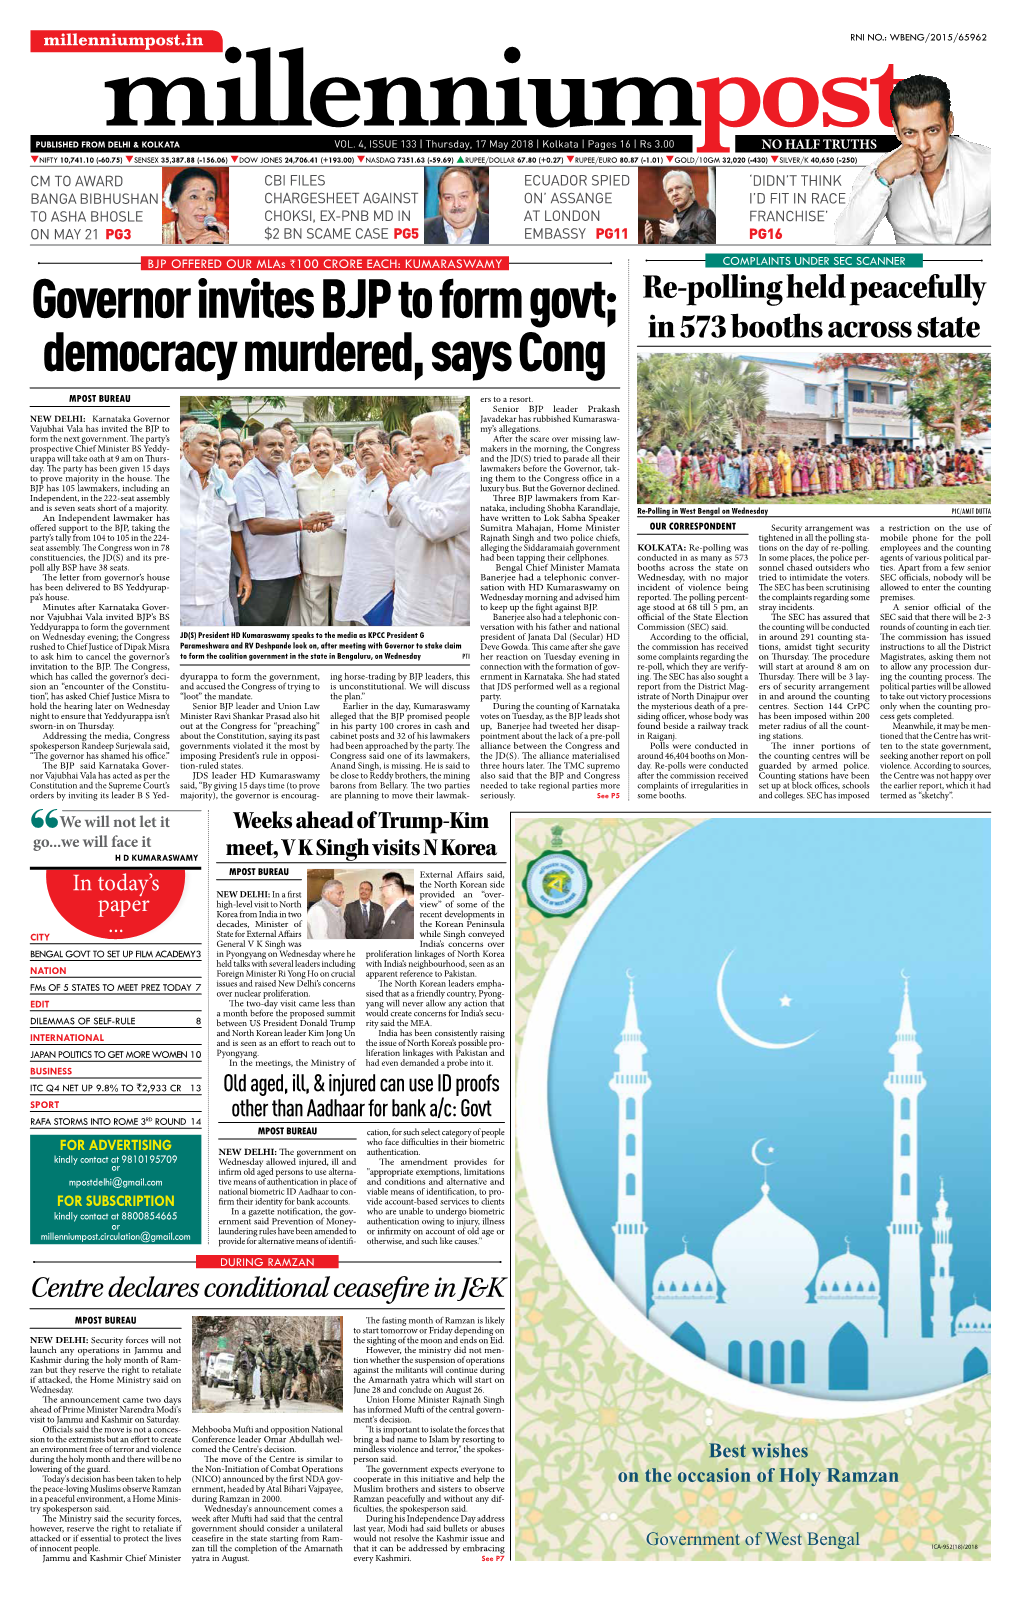 Governor Invites BJP to Form Govt; Re-Polling Held Peacefully Democracy Murdered, Says Cong in 573 Booths Across State